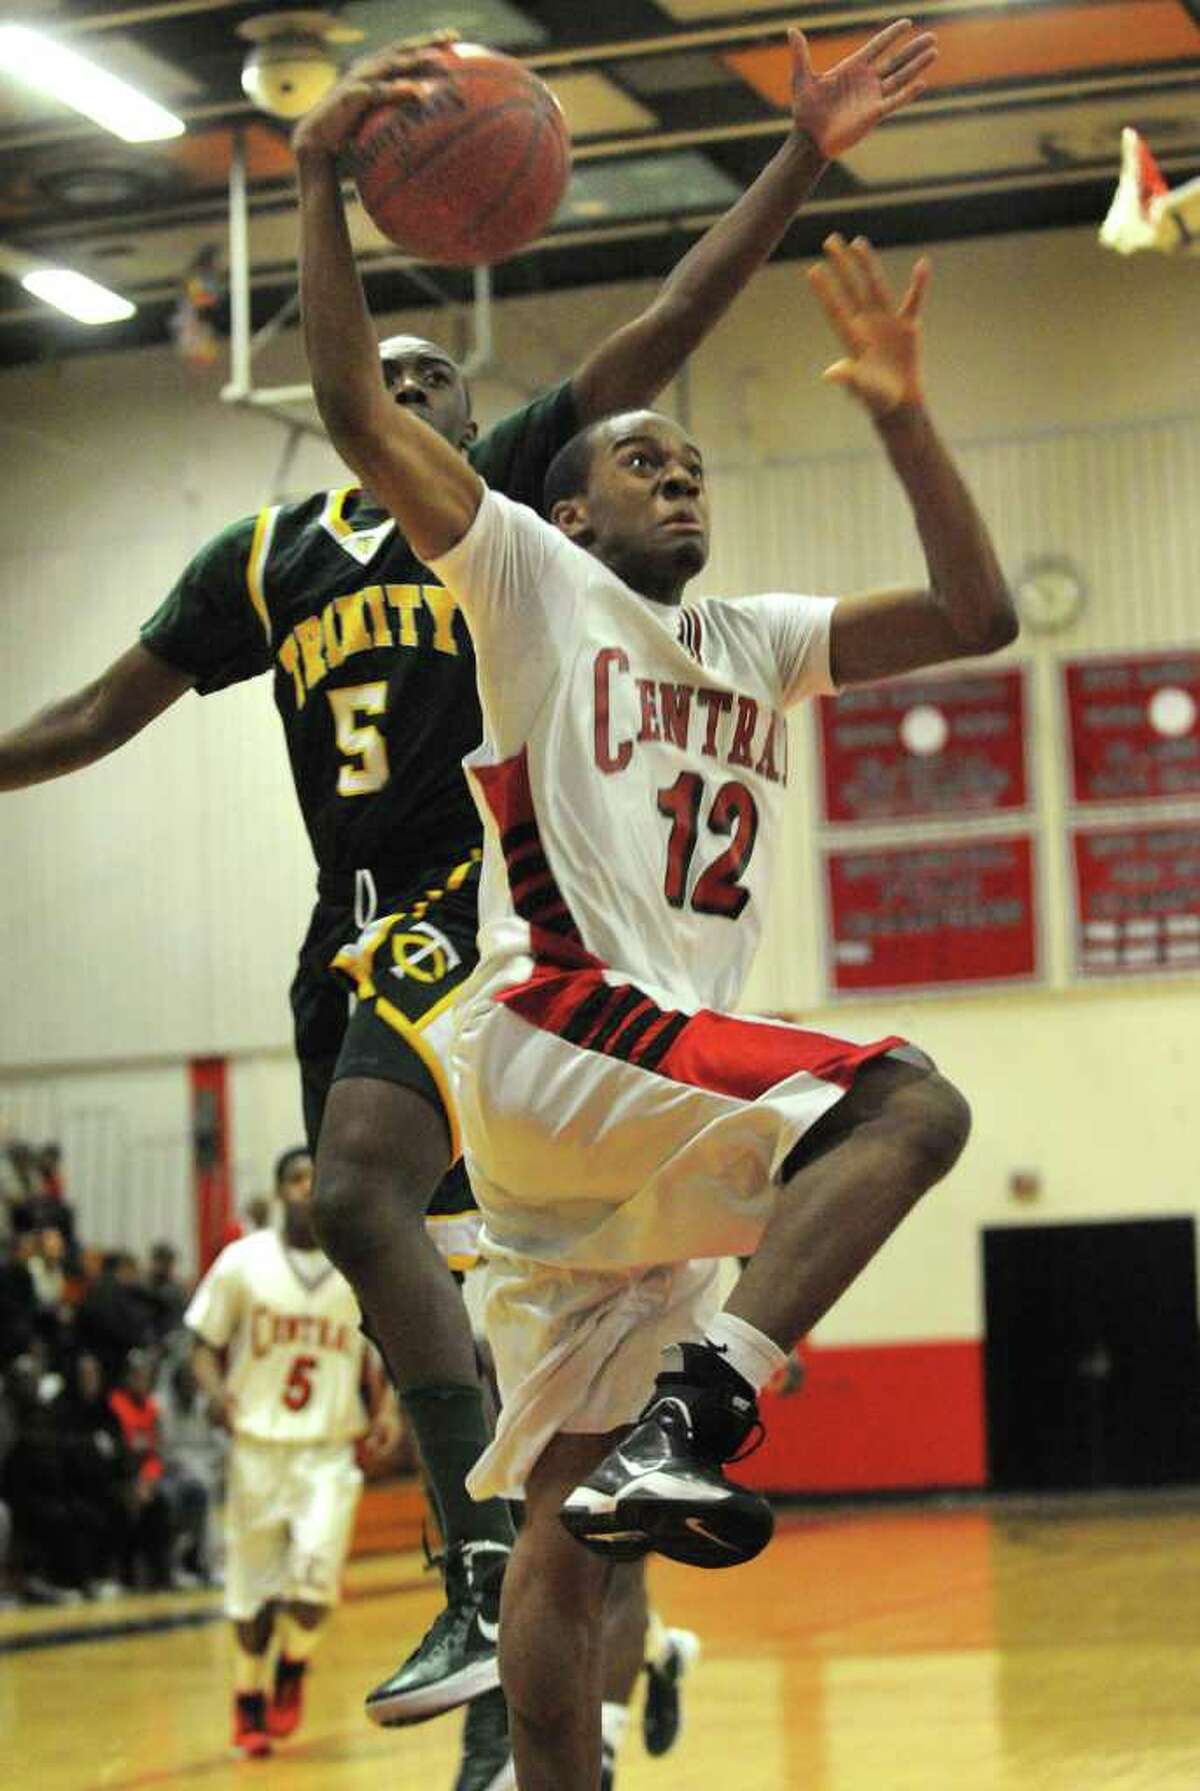 Trinity Catholic's Brandon Wheeler, left, looks for the block as Central's Josh Wilkerson drives to the basket during their FCIAC matchup at Central High School in Bridgeport on Monday, February 20, 2012.